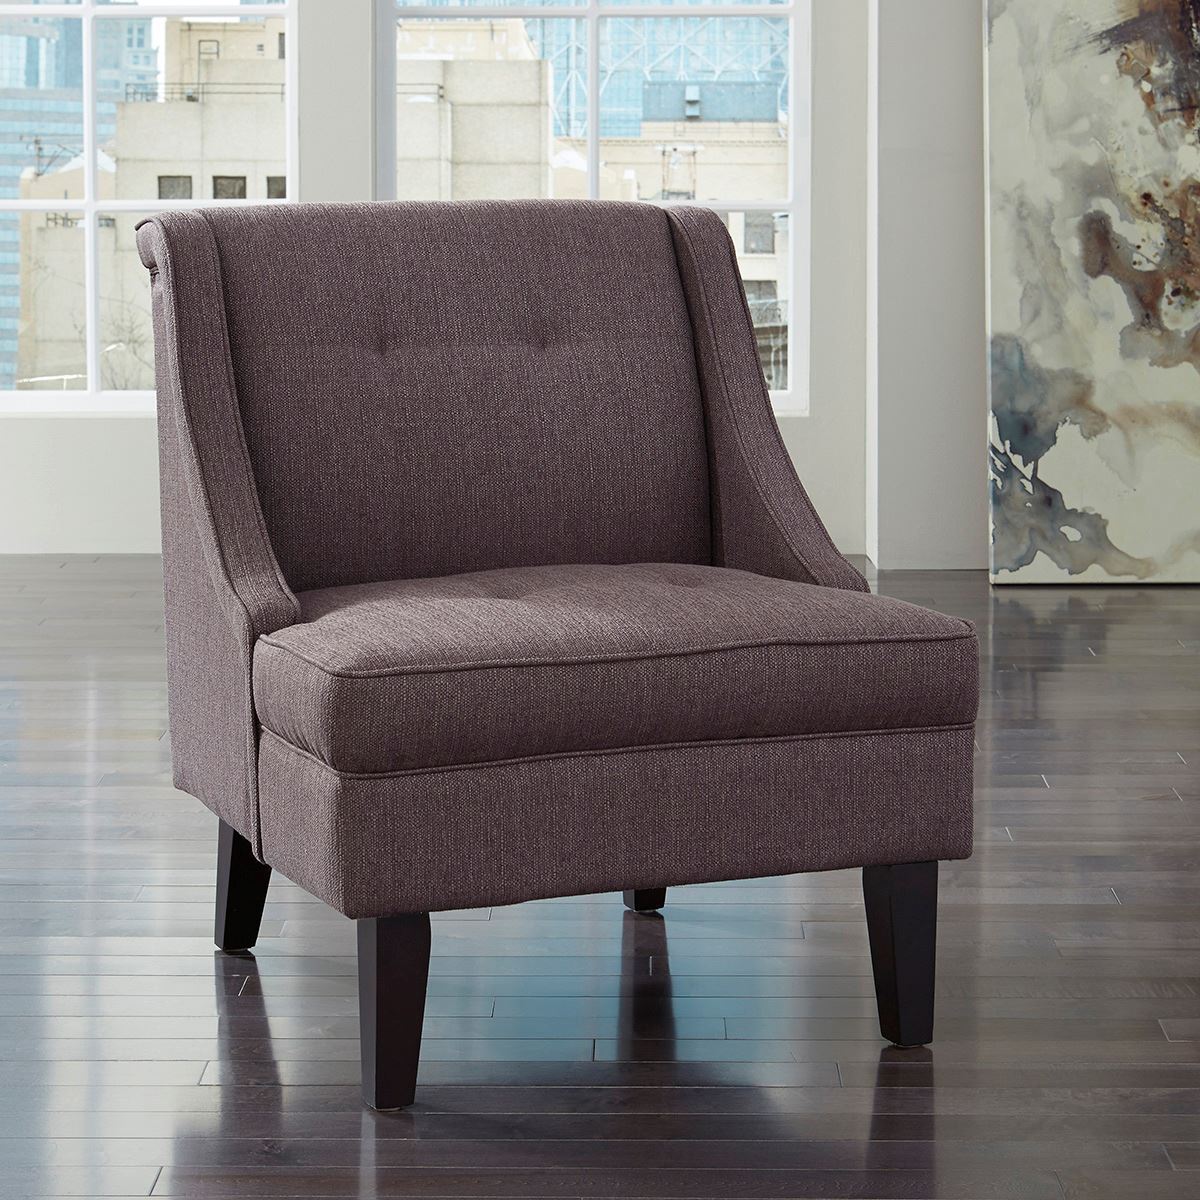 Gray Accent Chair | Living Room Chairs | Lifestyle ...